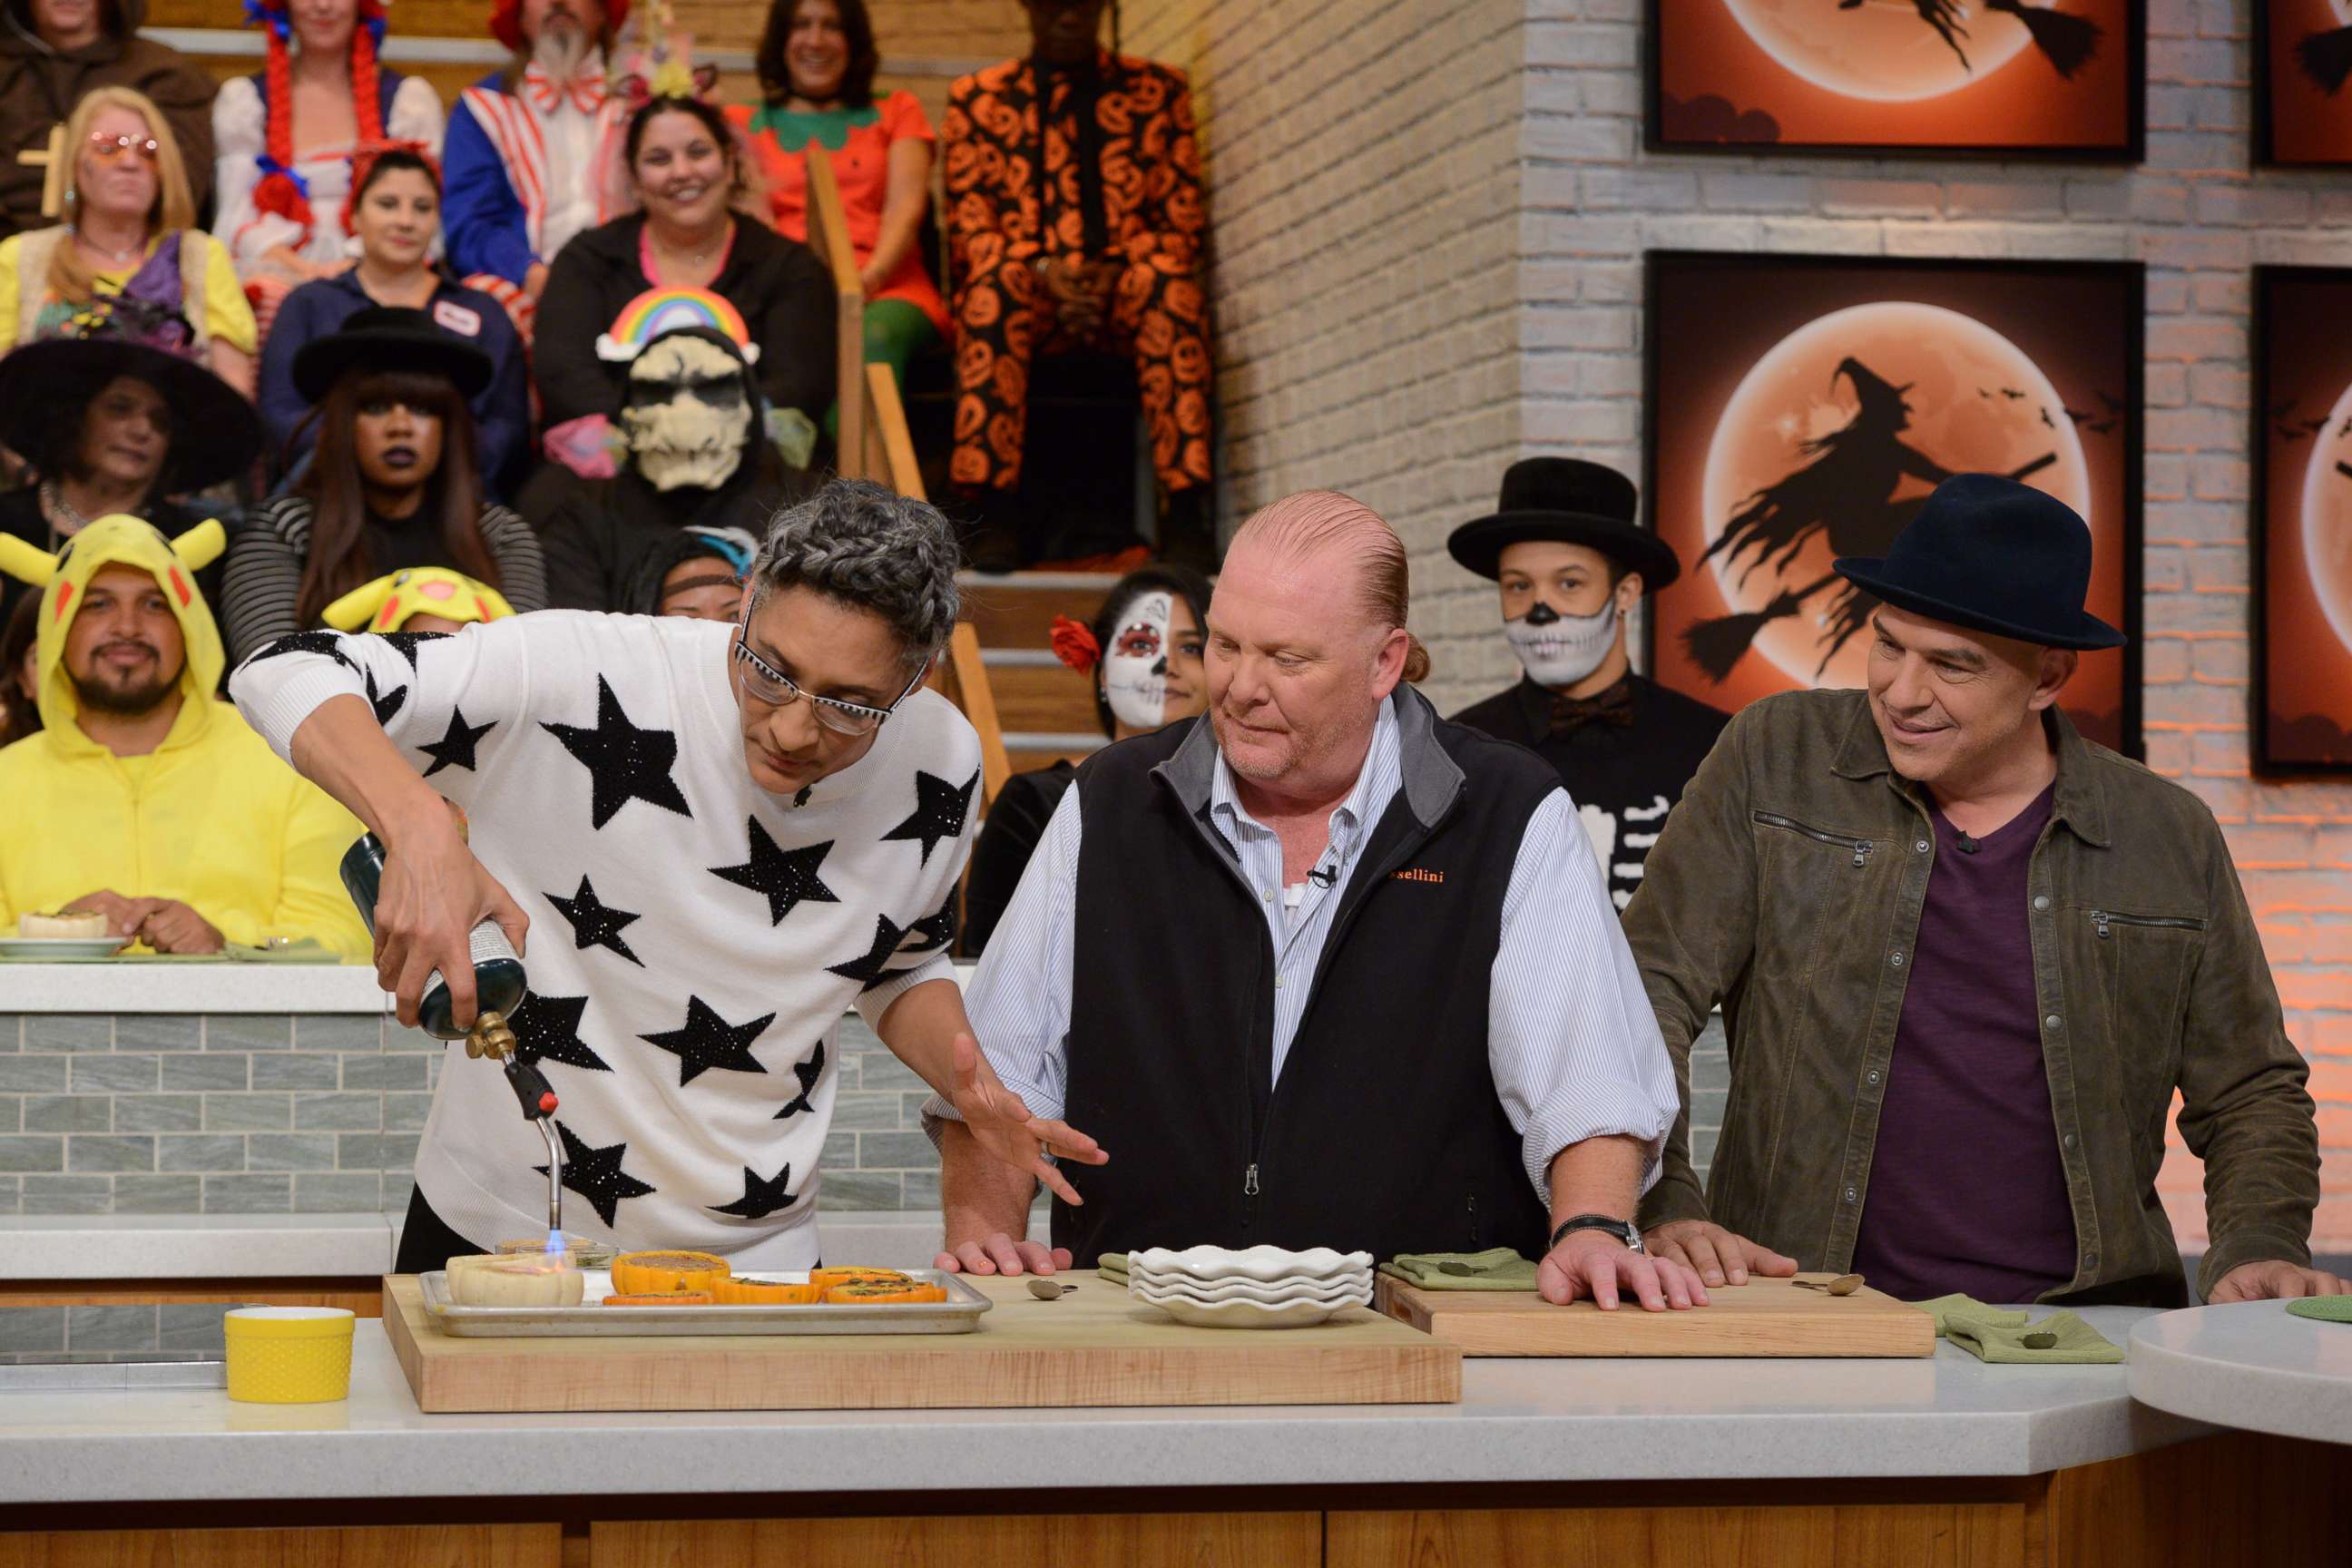 PHOTO: Carla Hall, Mario Batali, and Michael Symon shown on "The Chews Halloween Bash" which aired on October 31, 2017on ABC.  